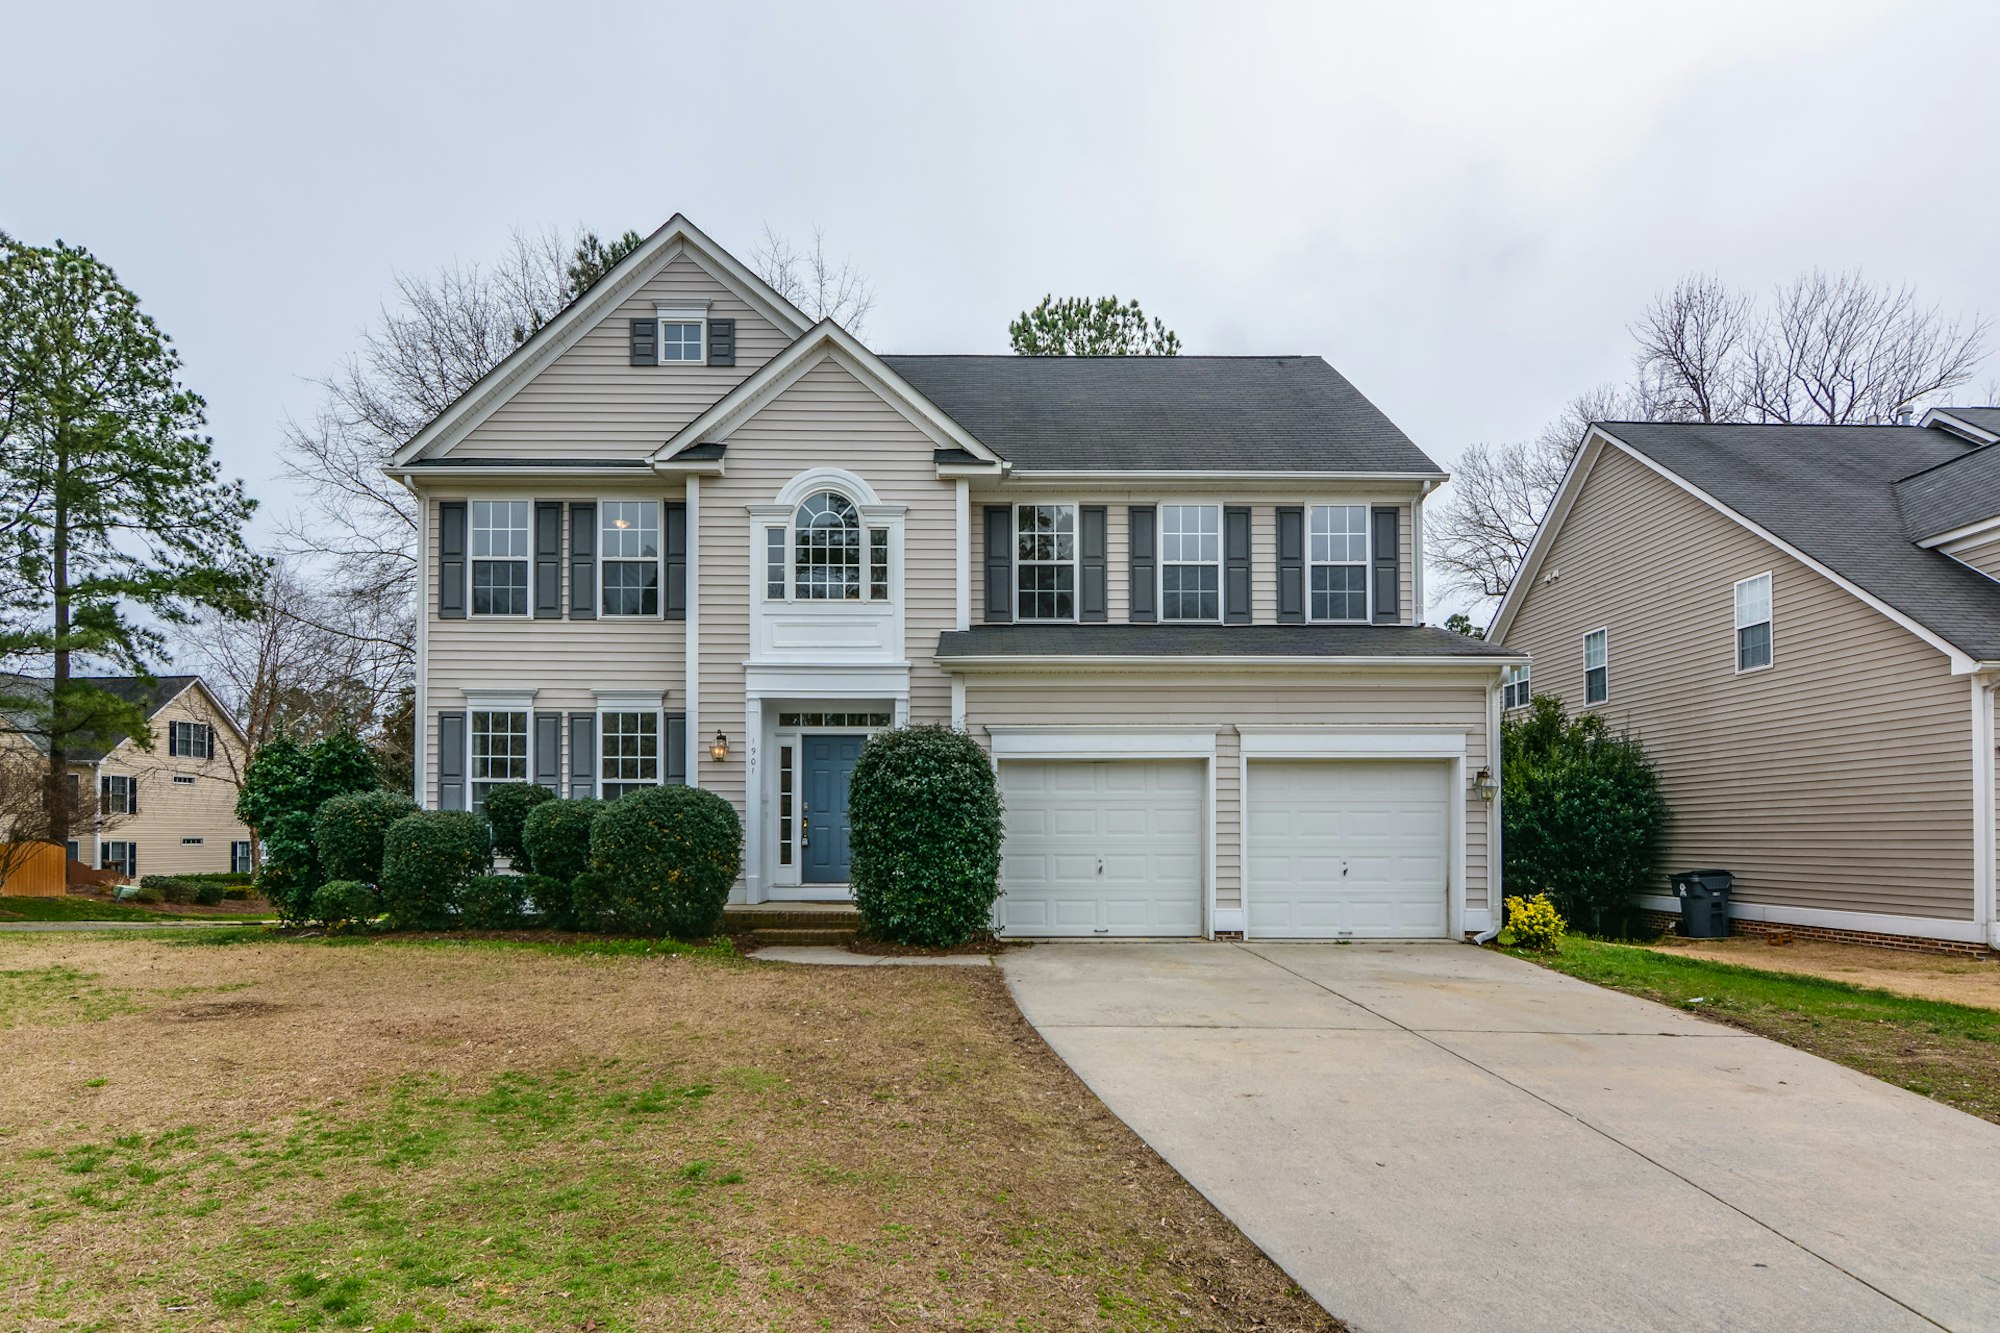 Photo 1 of 34 - 1901 Abby Knoll Dr, Apex, NC 27502